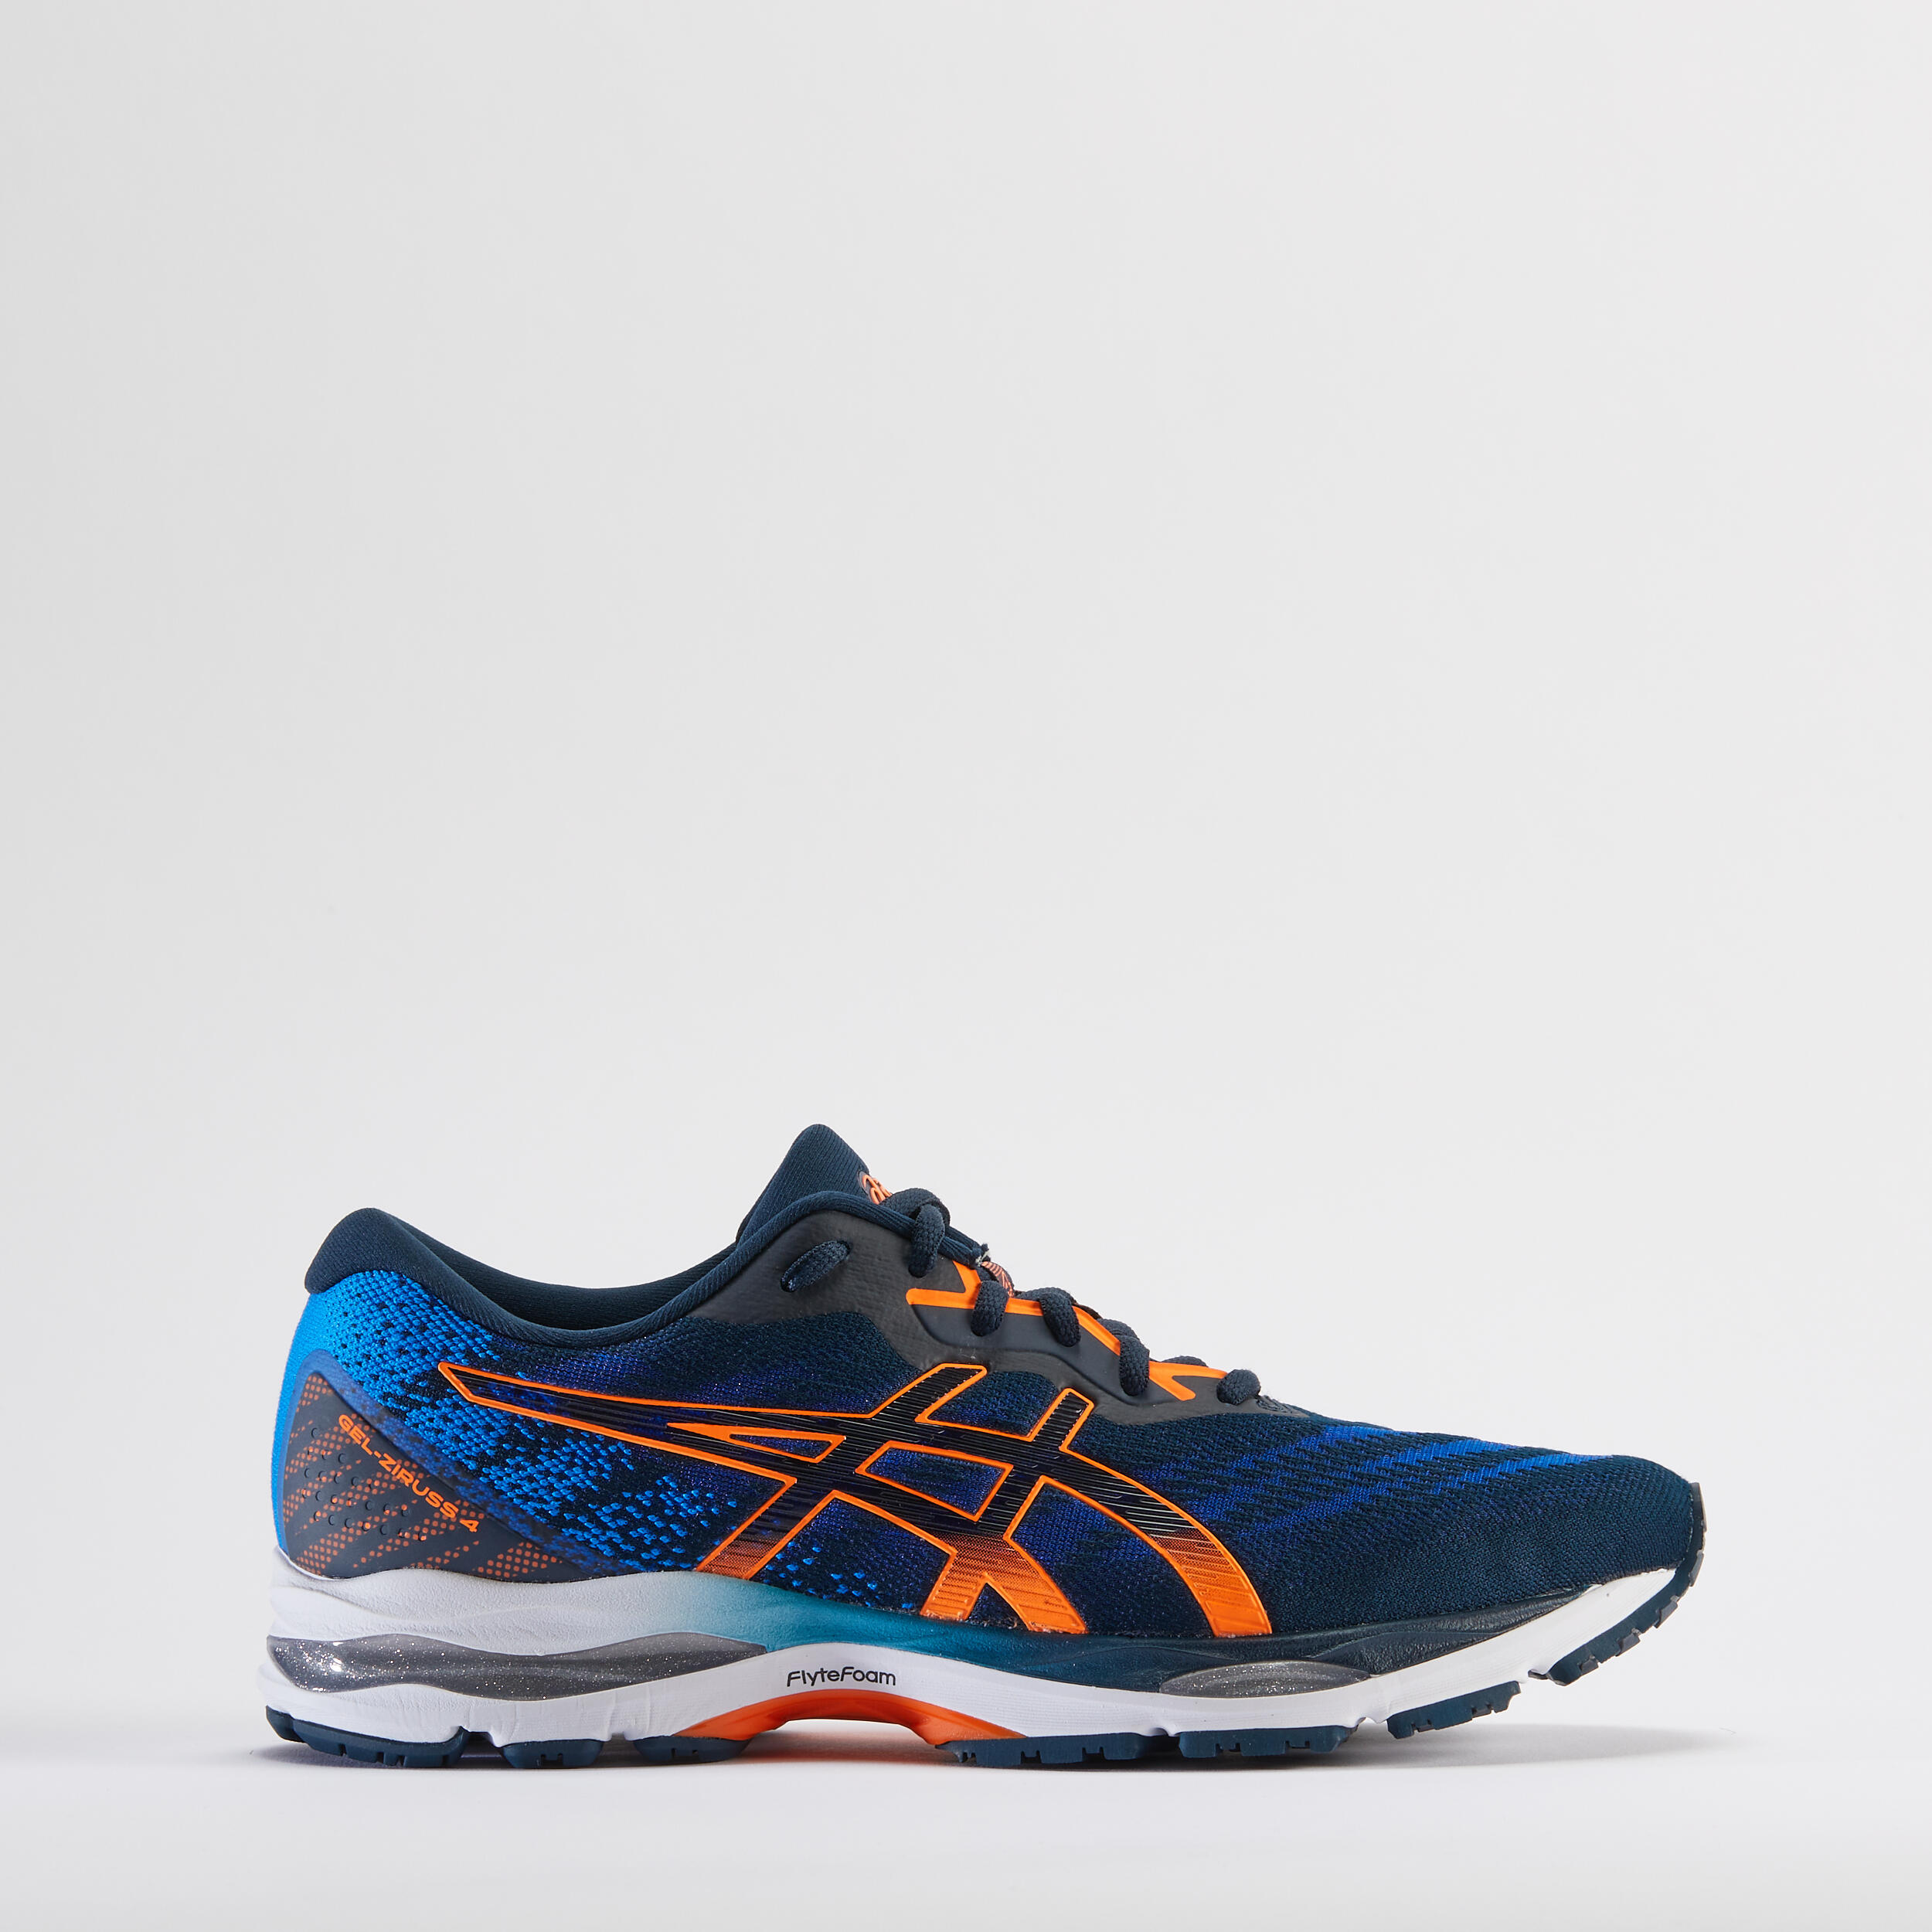 asics gel homme chaussures